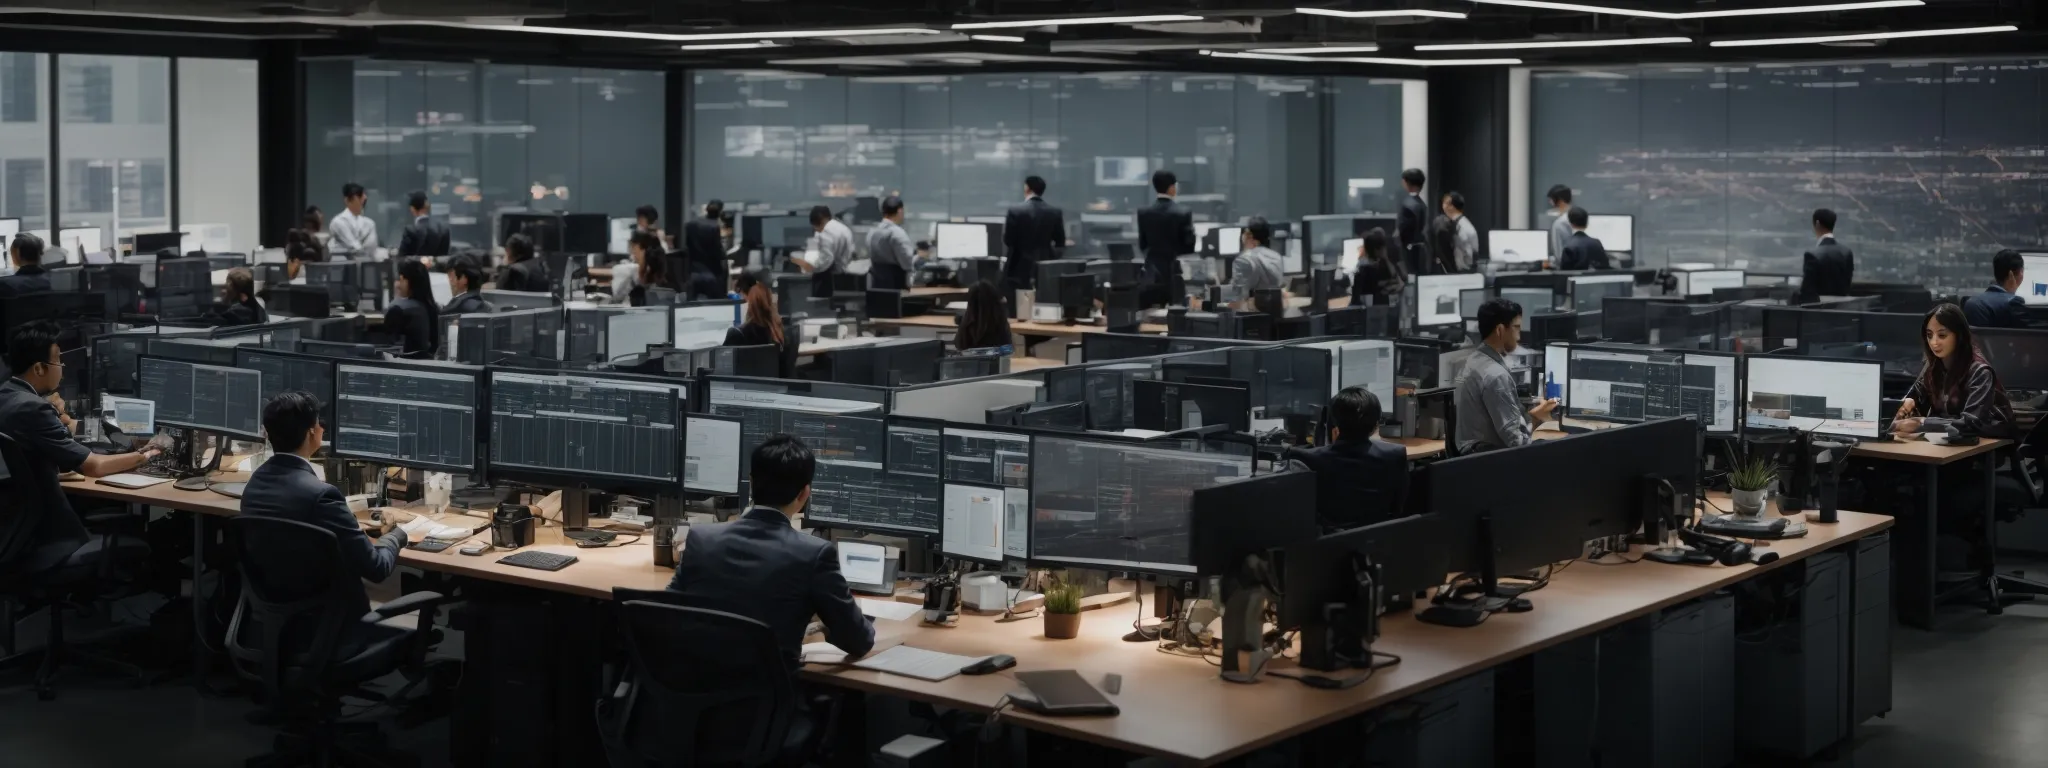 a sprawling office space filled with diverse employees collaborating around large monitors displaying complex data visualizations.